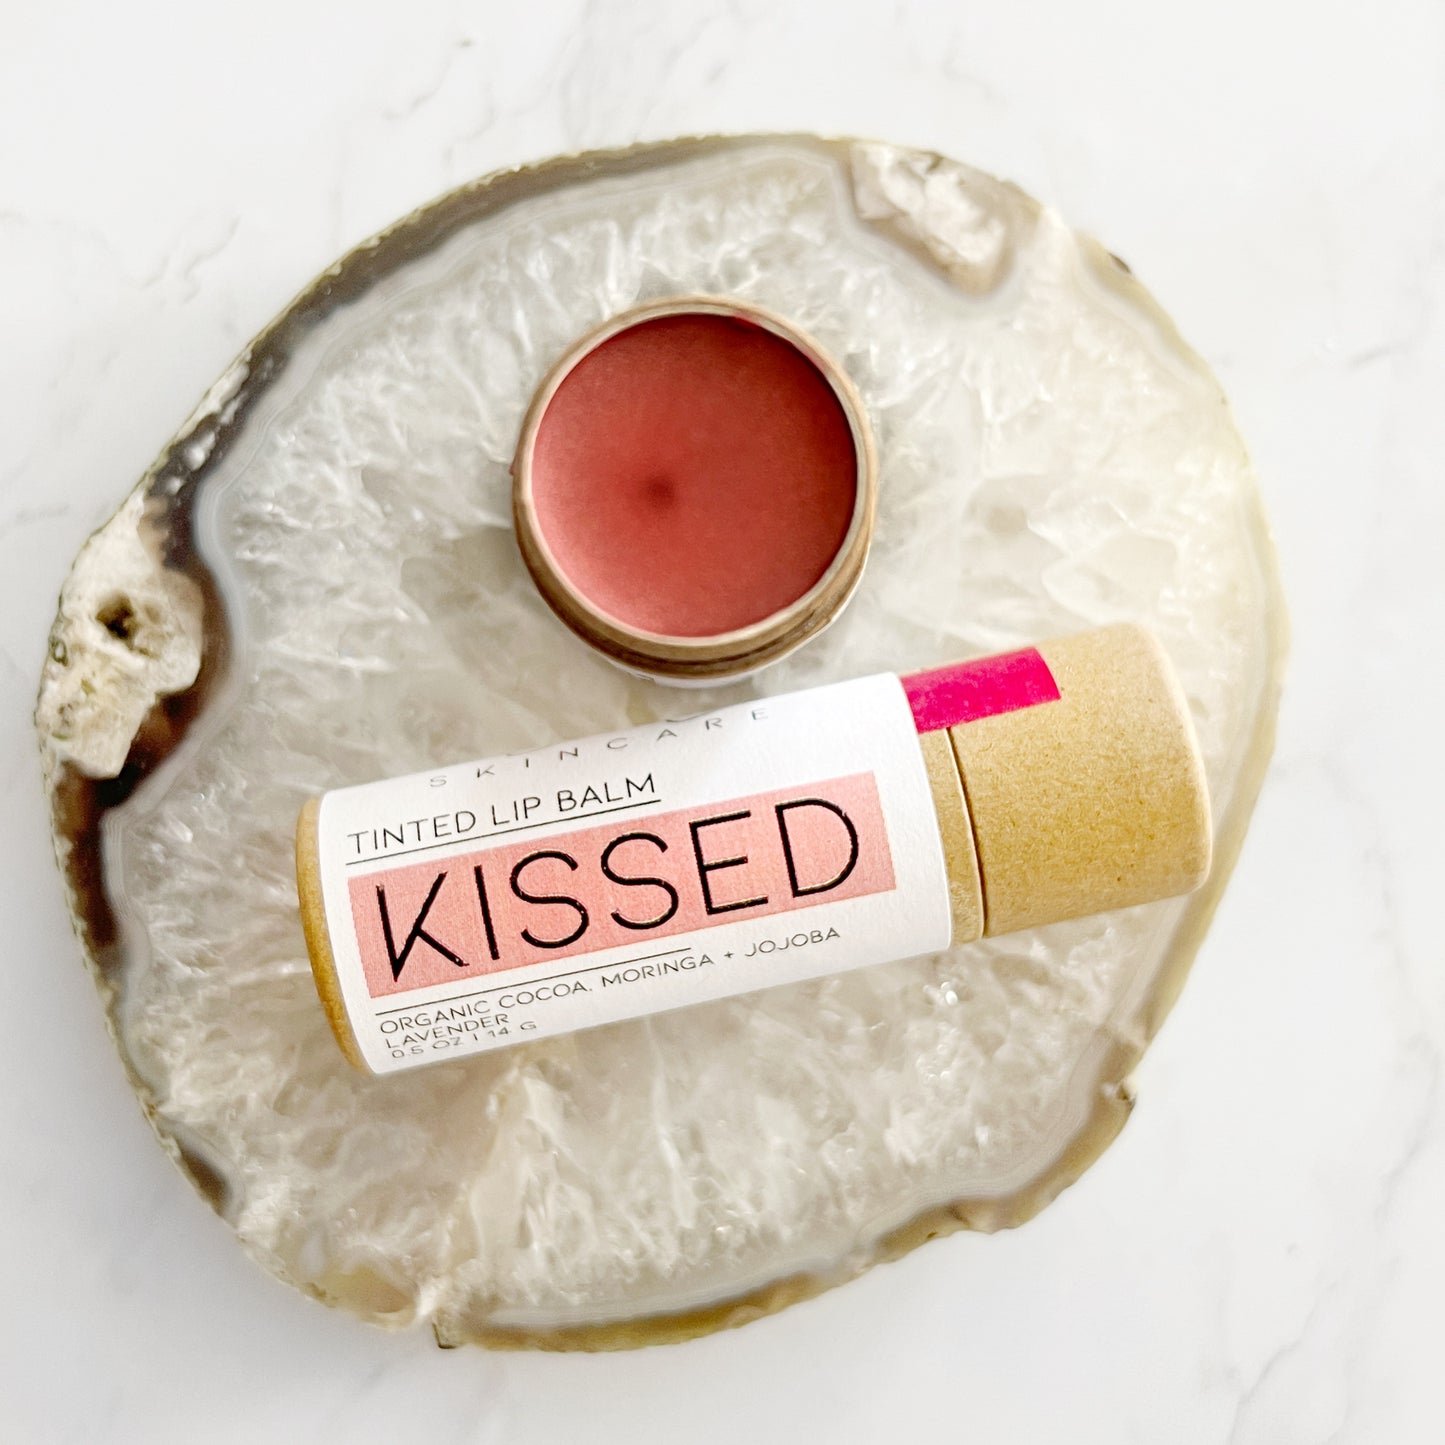 “Kissed” tinted lip balm in rose gold from Lather and Soul